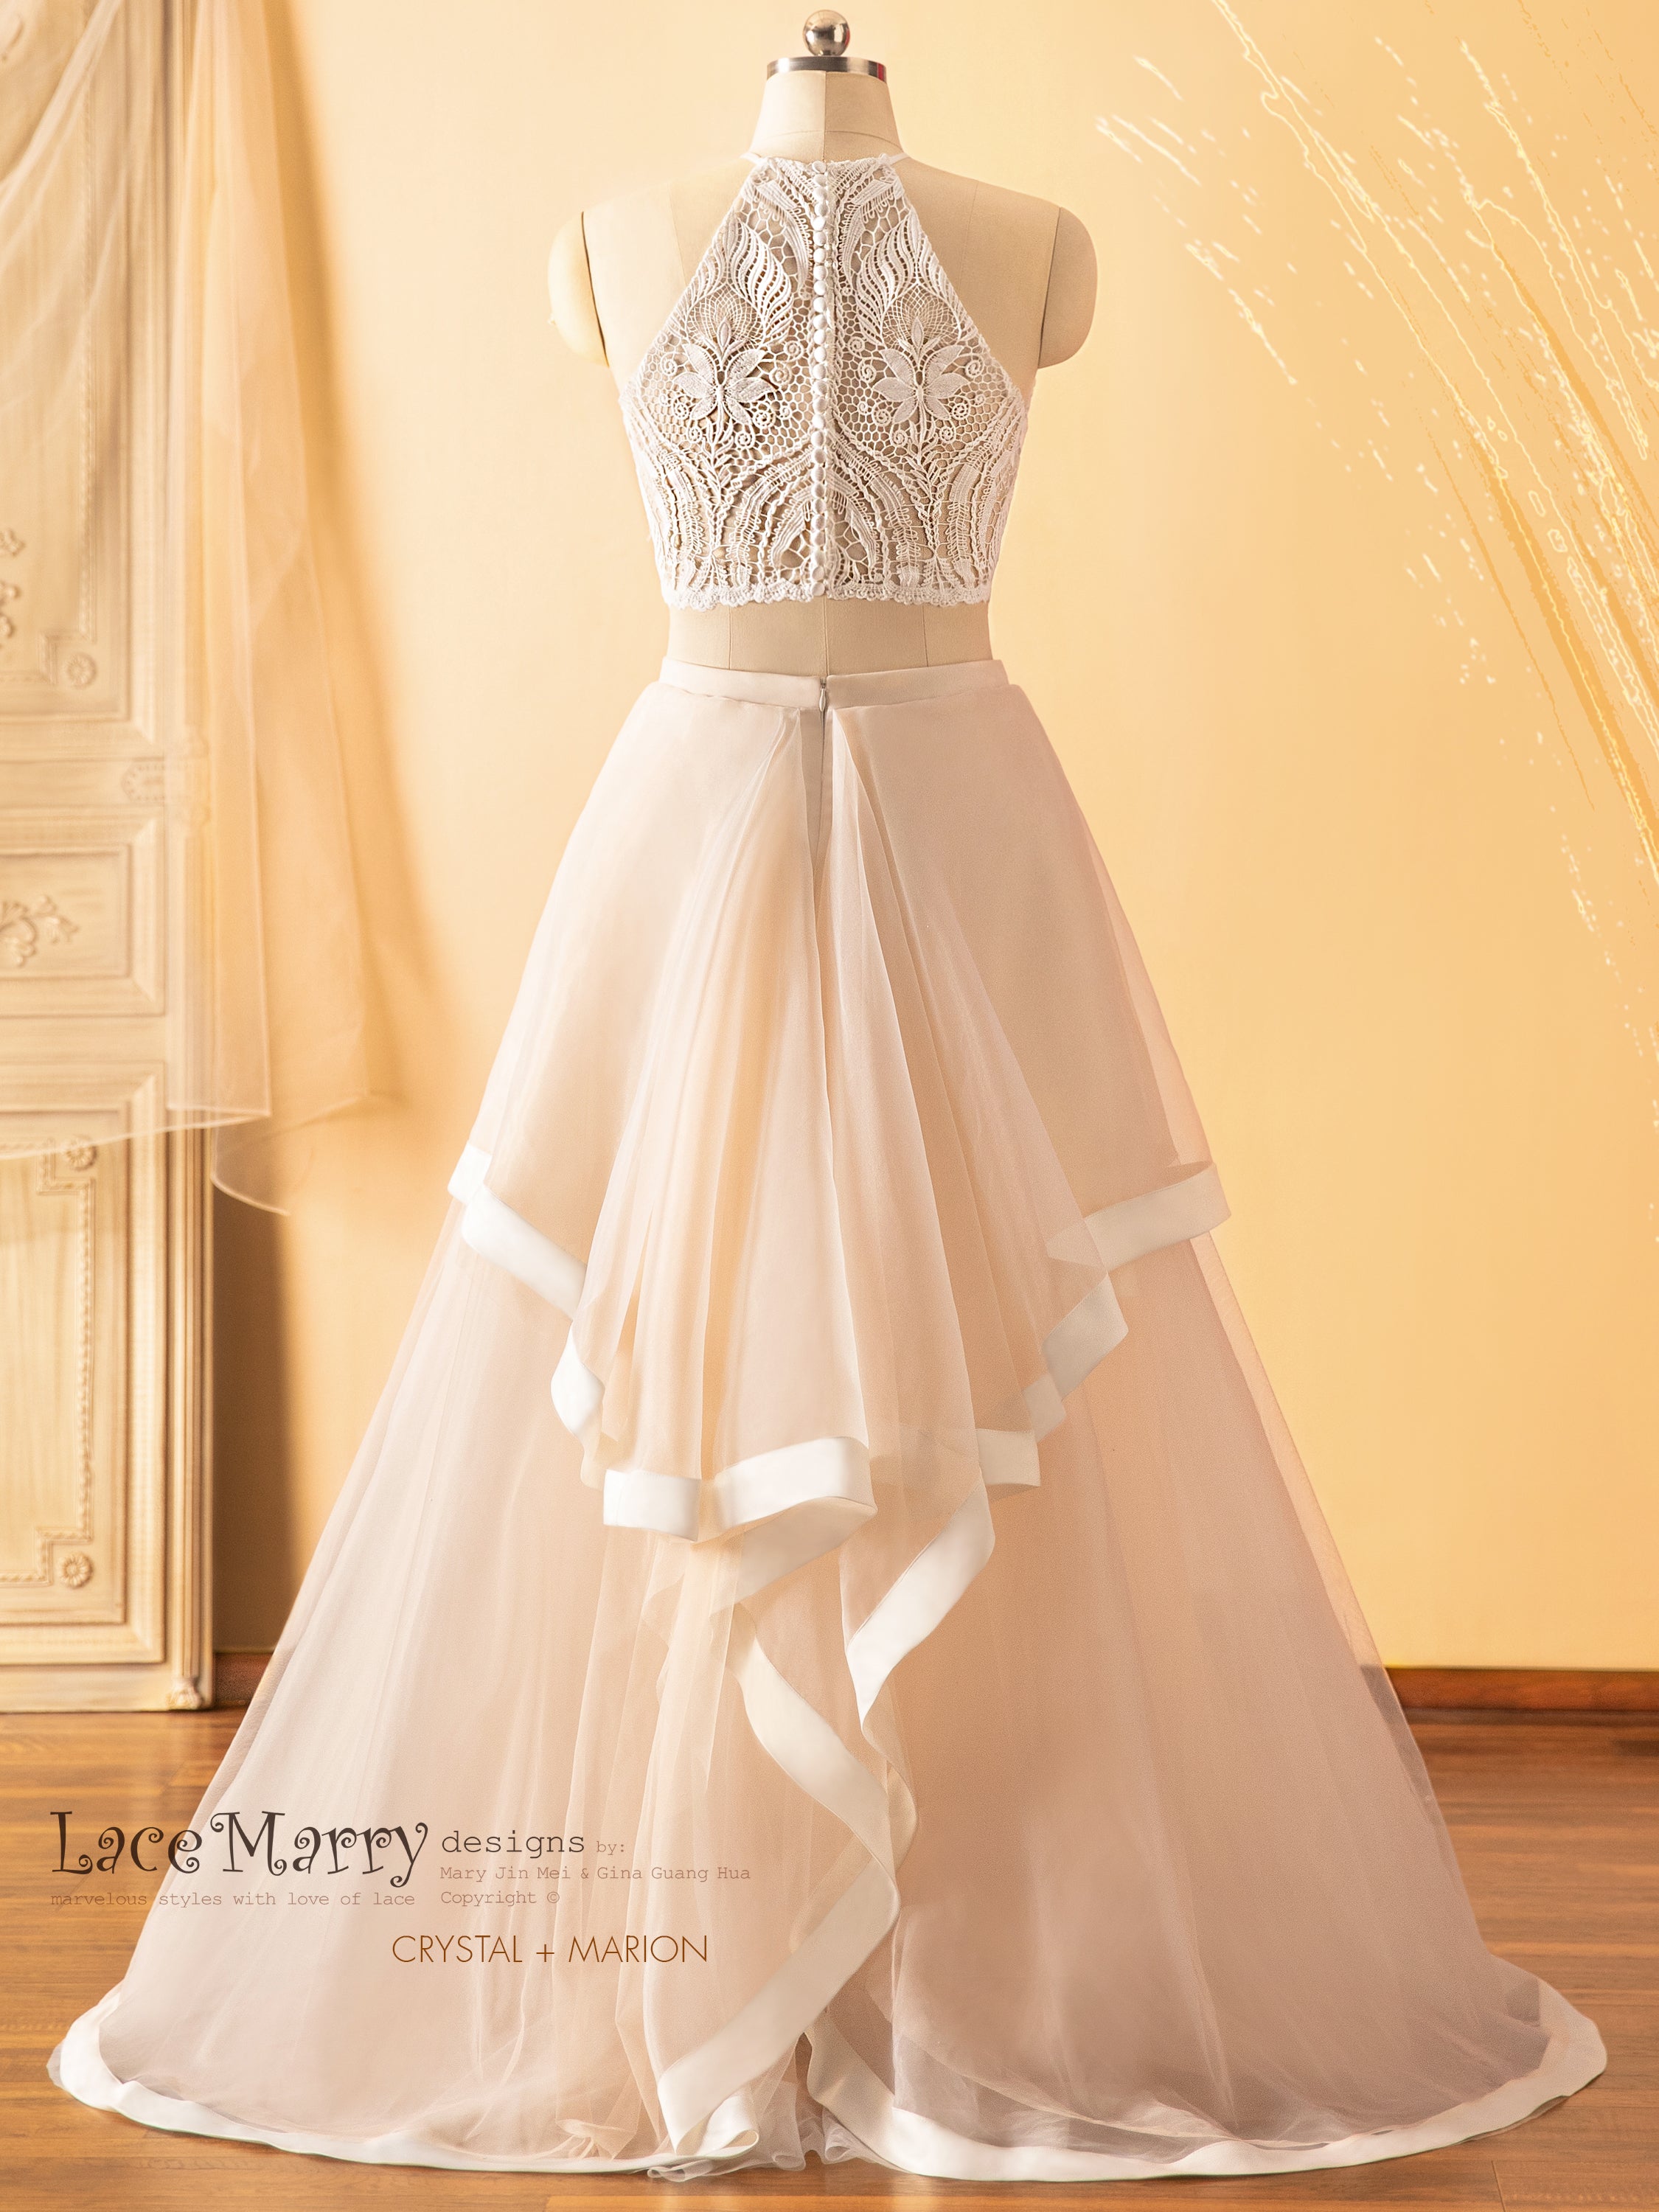 Hera White AC Ethereal Floral Lace Wedding Dress with Tiered Tulle Skirt 16 / Ivory/ Pink